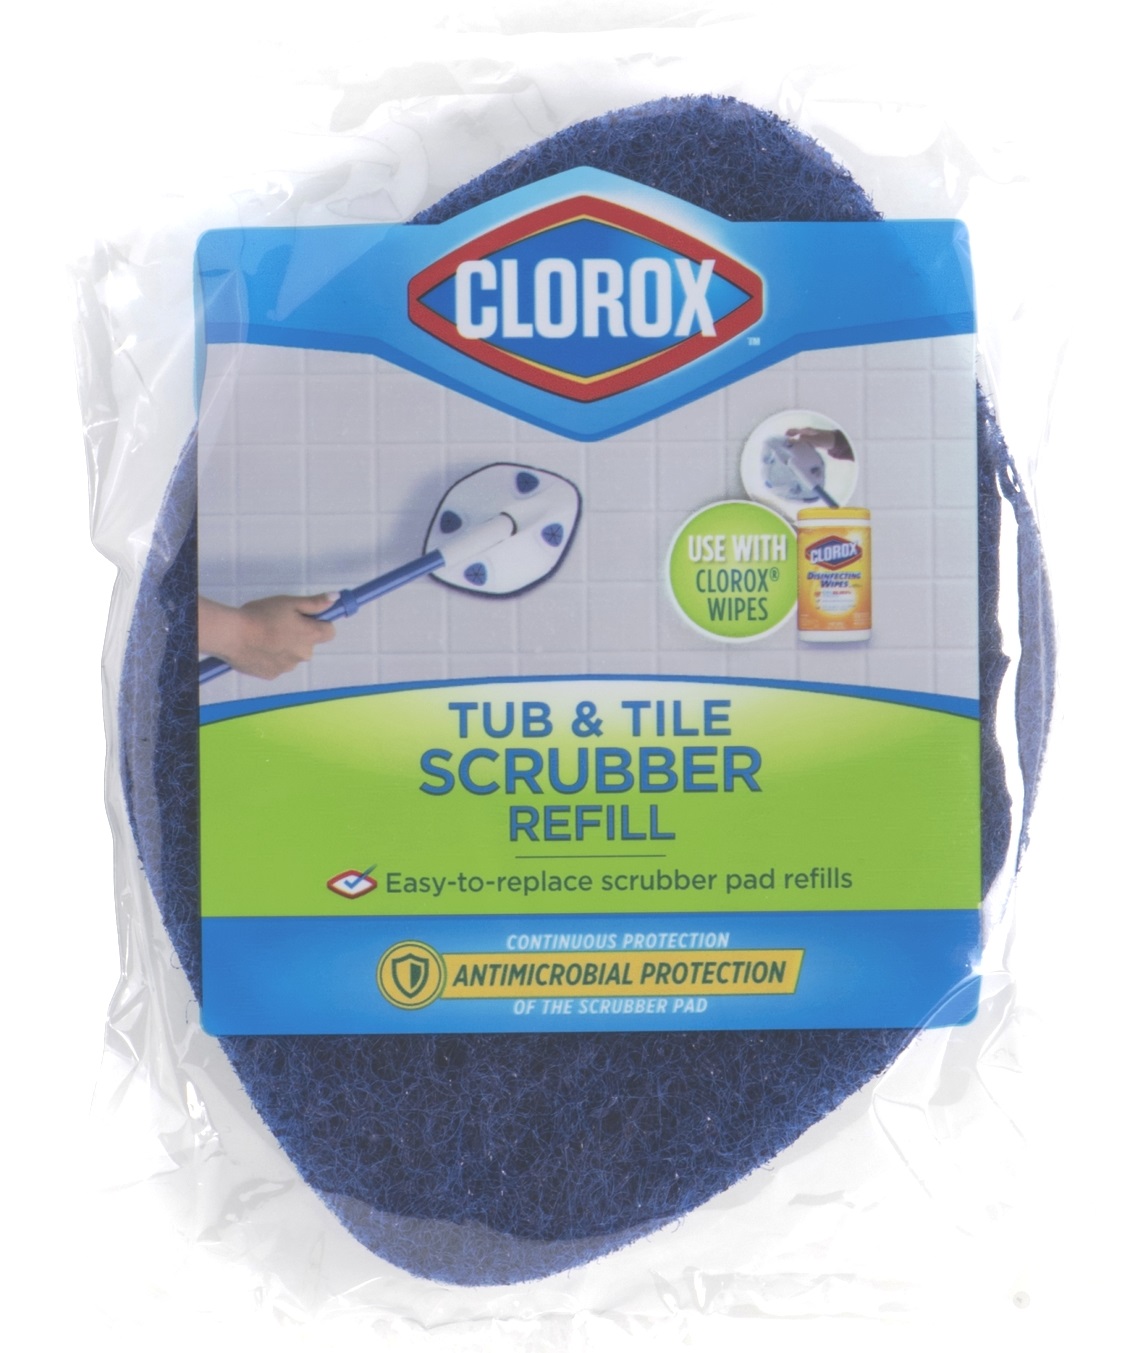 620030_Clorox_Tub and Tile Scrubber Refill_Packaging 1